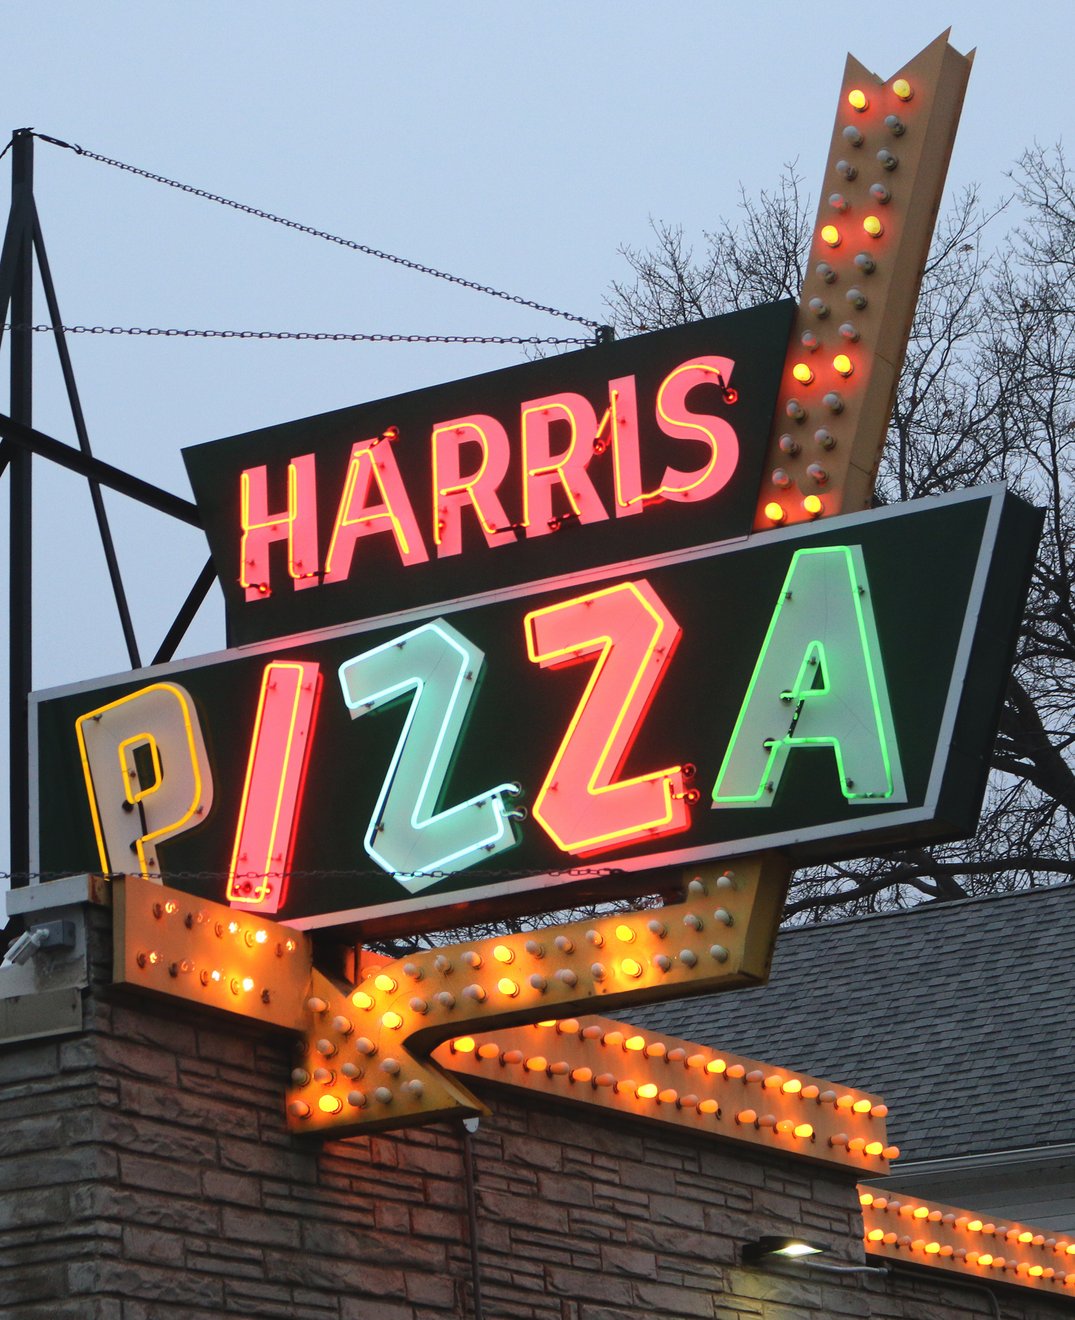 The Harris Pizza sign in west Davenport. Photo by Bruce Walters.